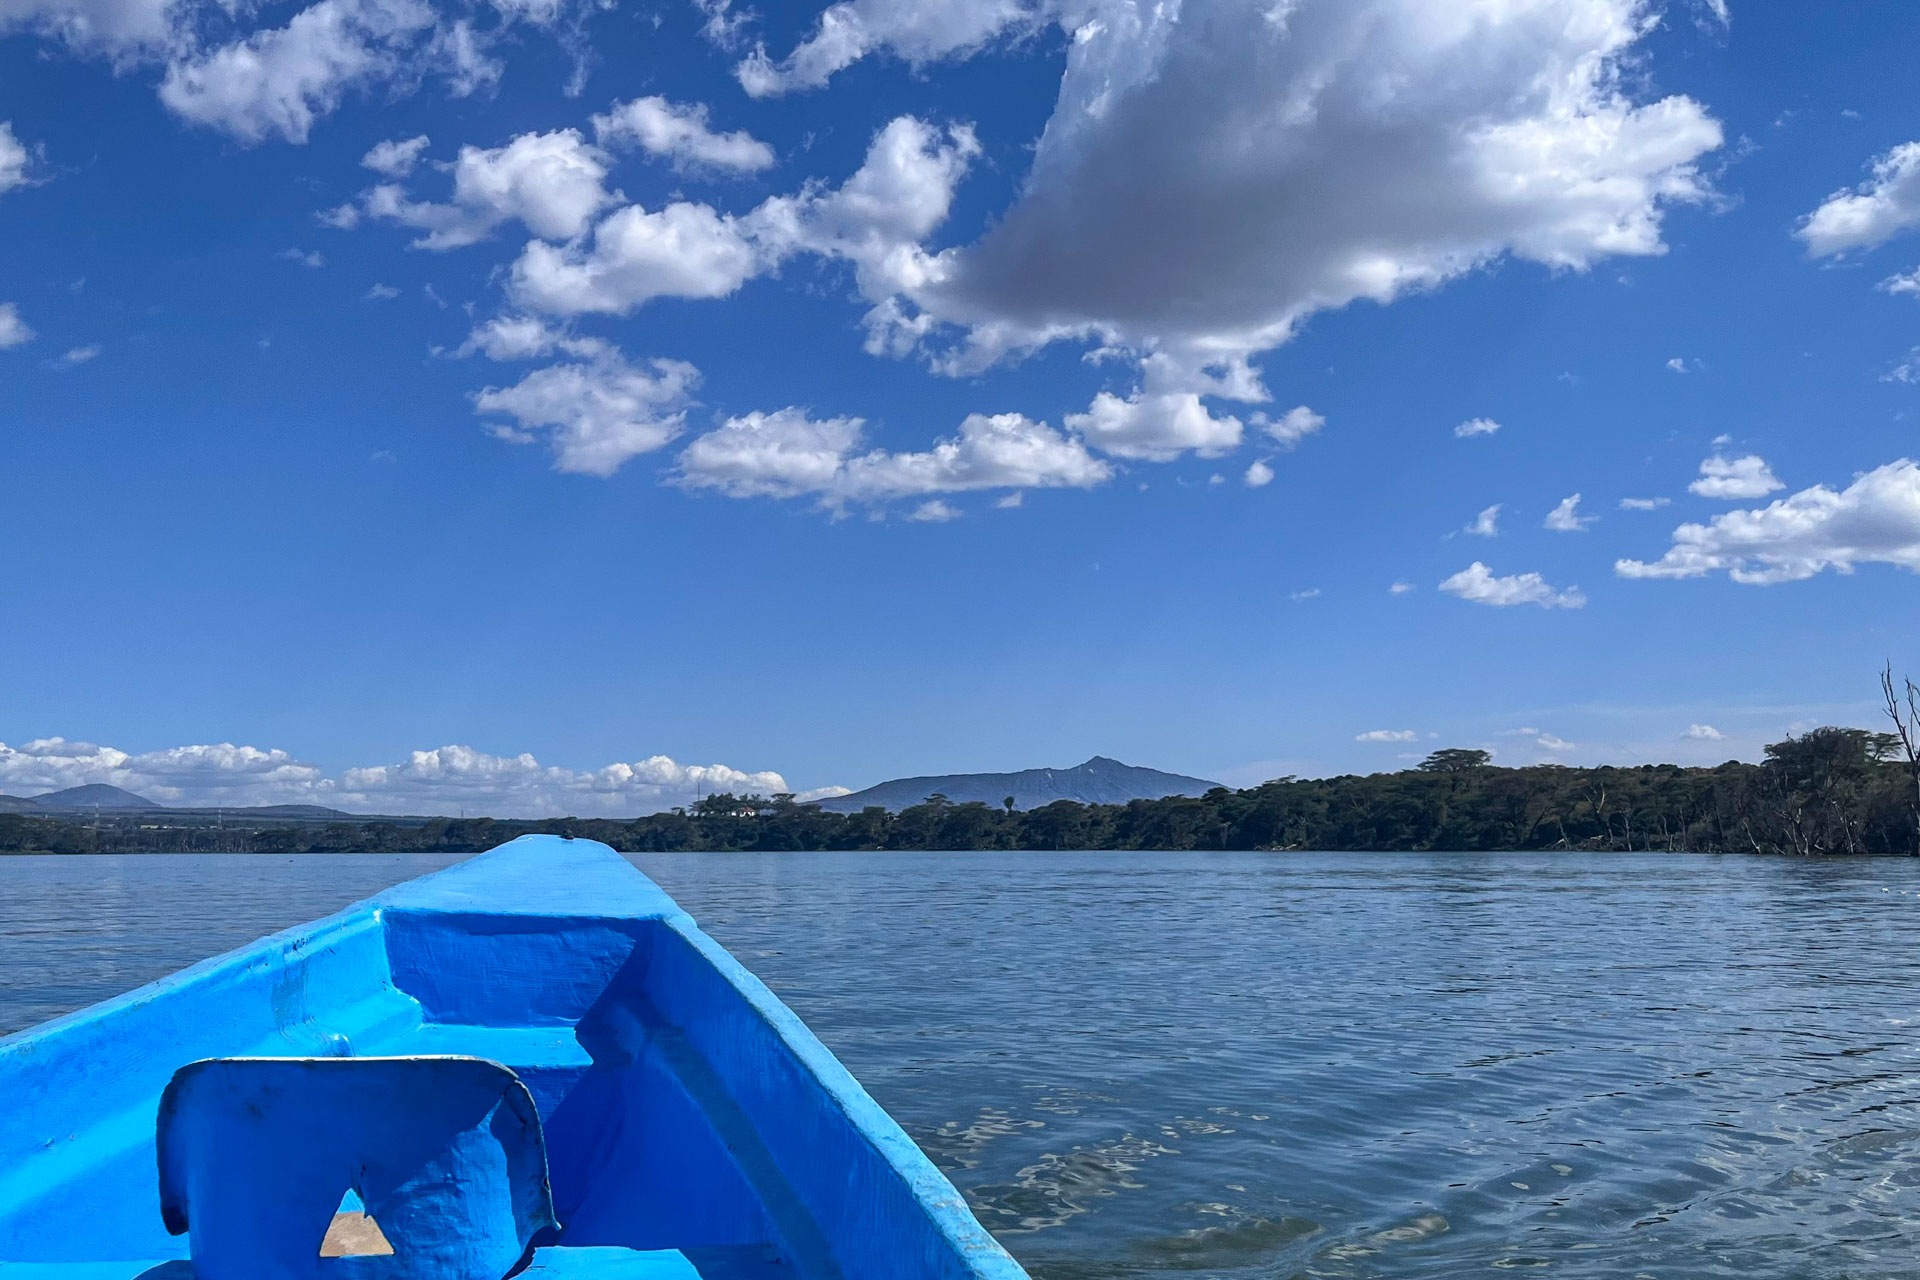 Above: Mount Longonot looking quite manageable from a boat on Lake Naivasha